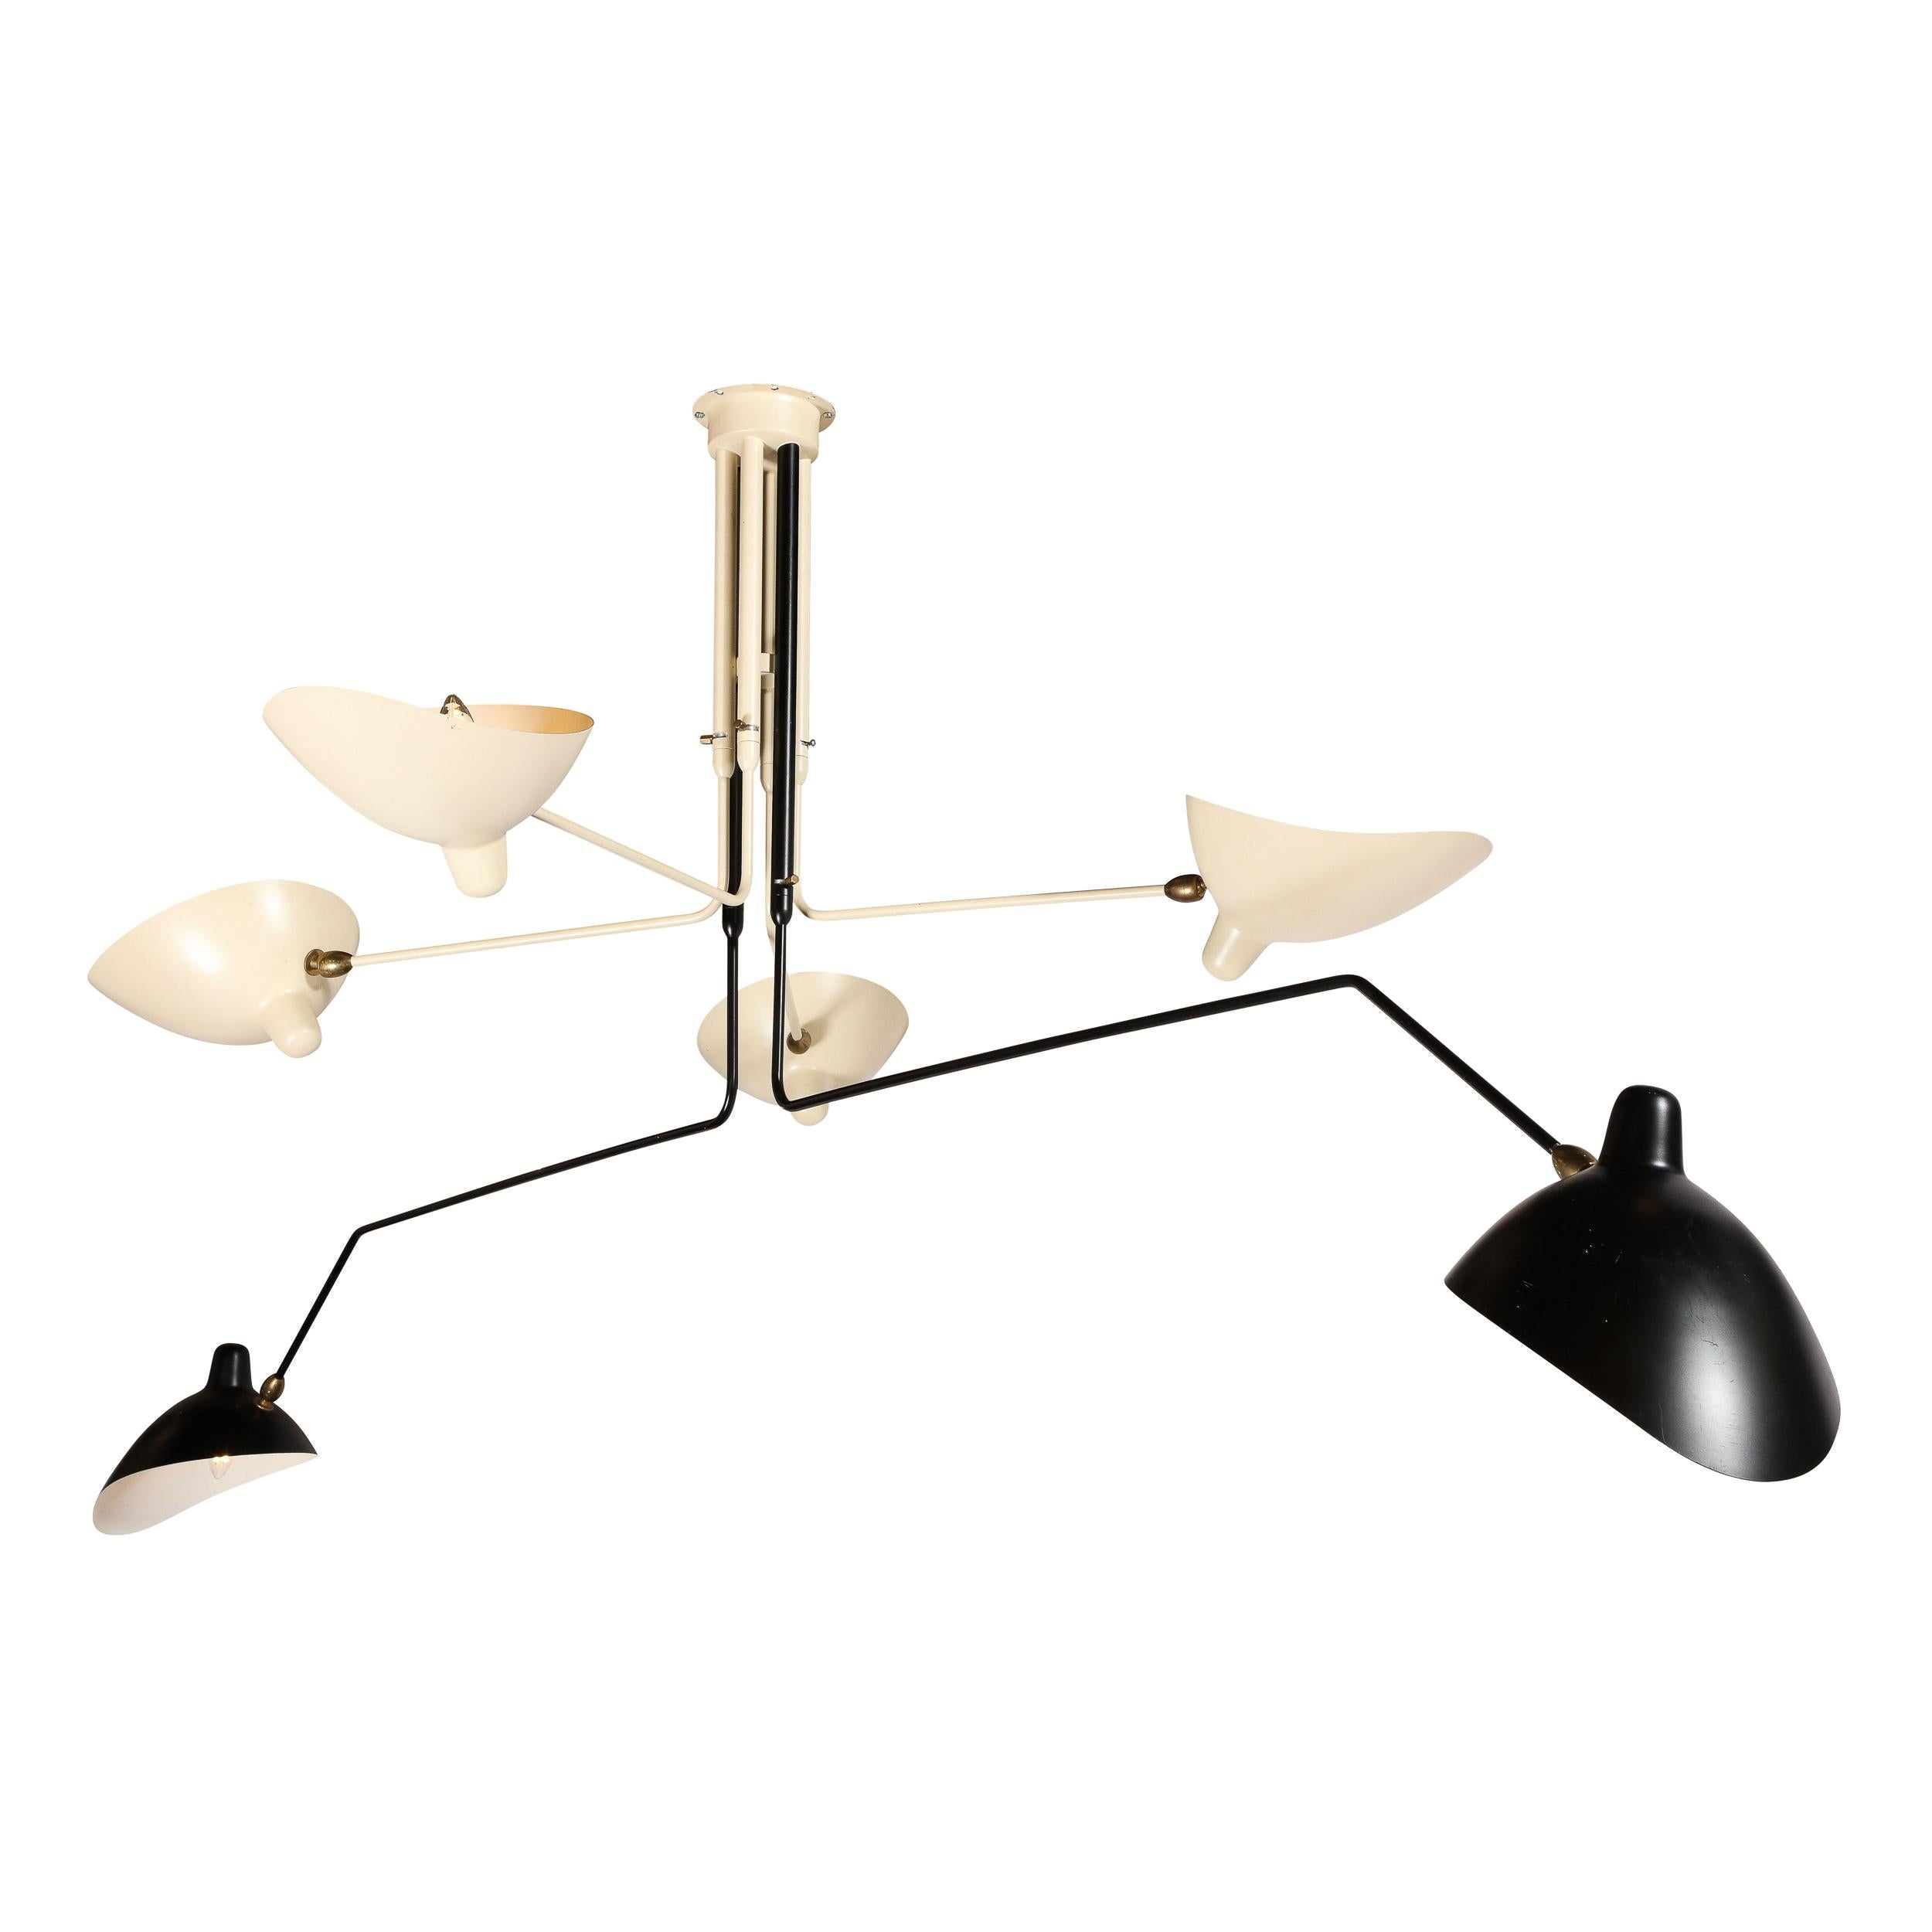 This highly elegant and expansive Mid-Century Modernist Six Arm Articulating Chandelier in Black and White Enamel with Brass Fittings is made by the esteemed designer and metalworker Serge Mouille, originating from France in 1958. This piece